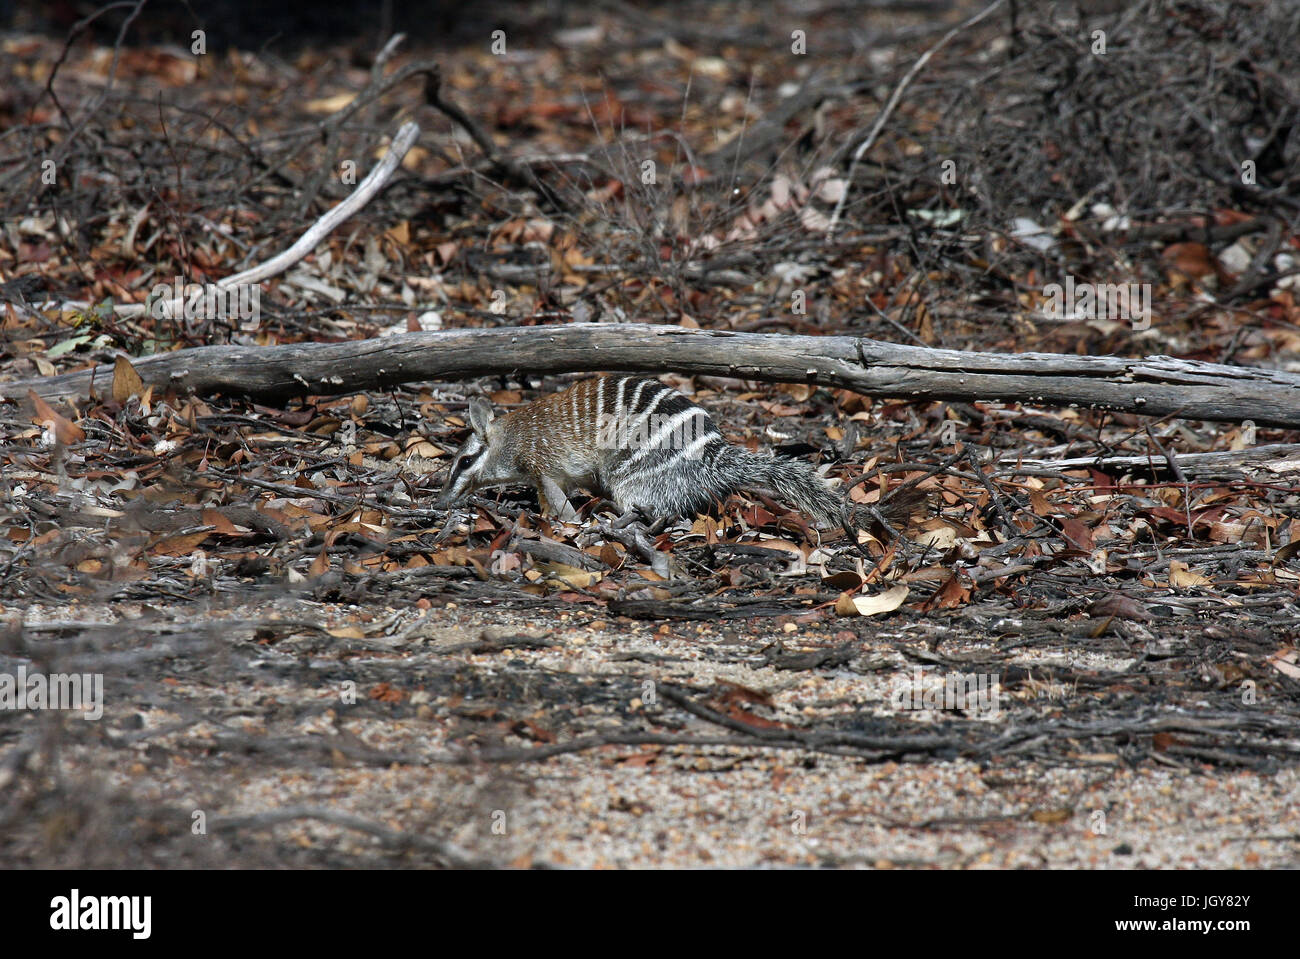 A Numbat or Banded Anteater (Myrmecobius fasciatus) looking for ants in Dryandra Woodlands in Western Australia Stock Photo